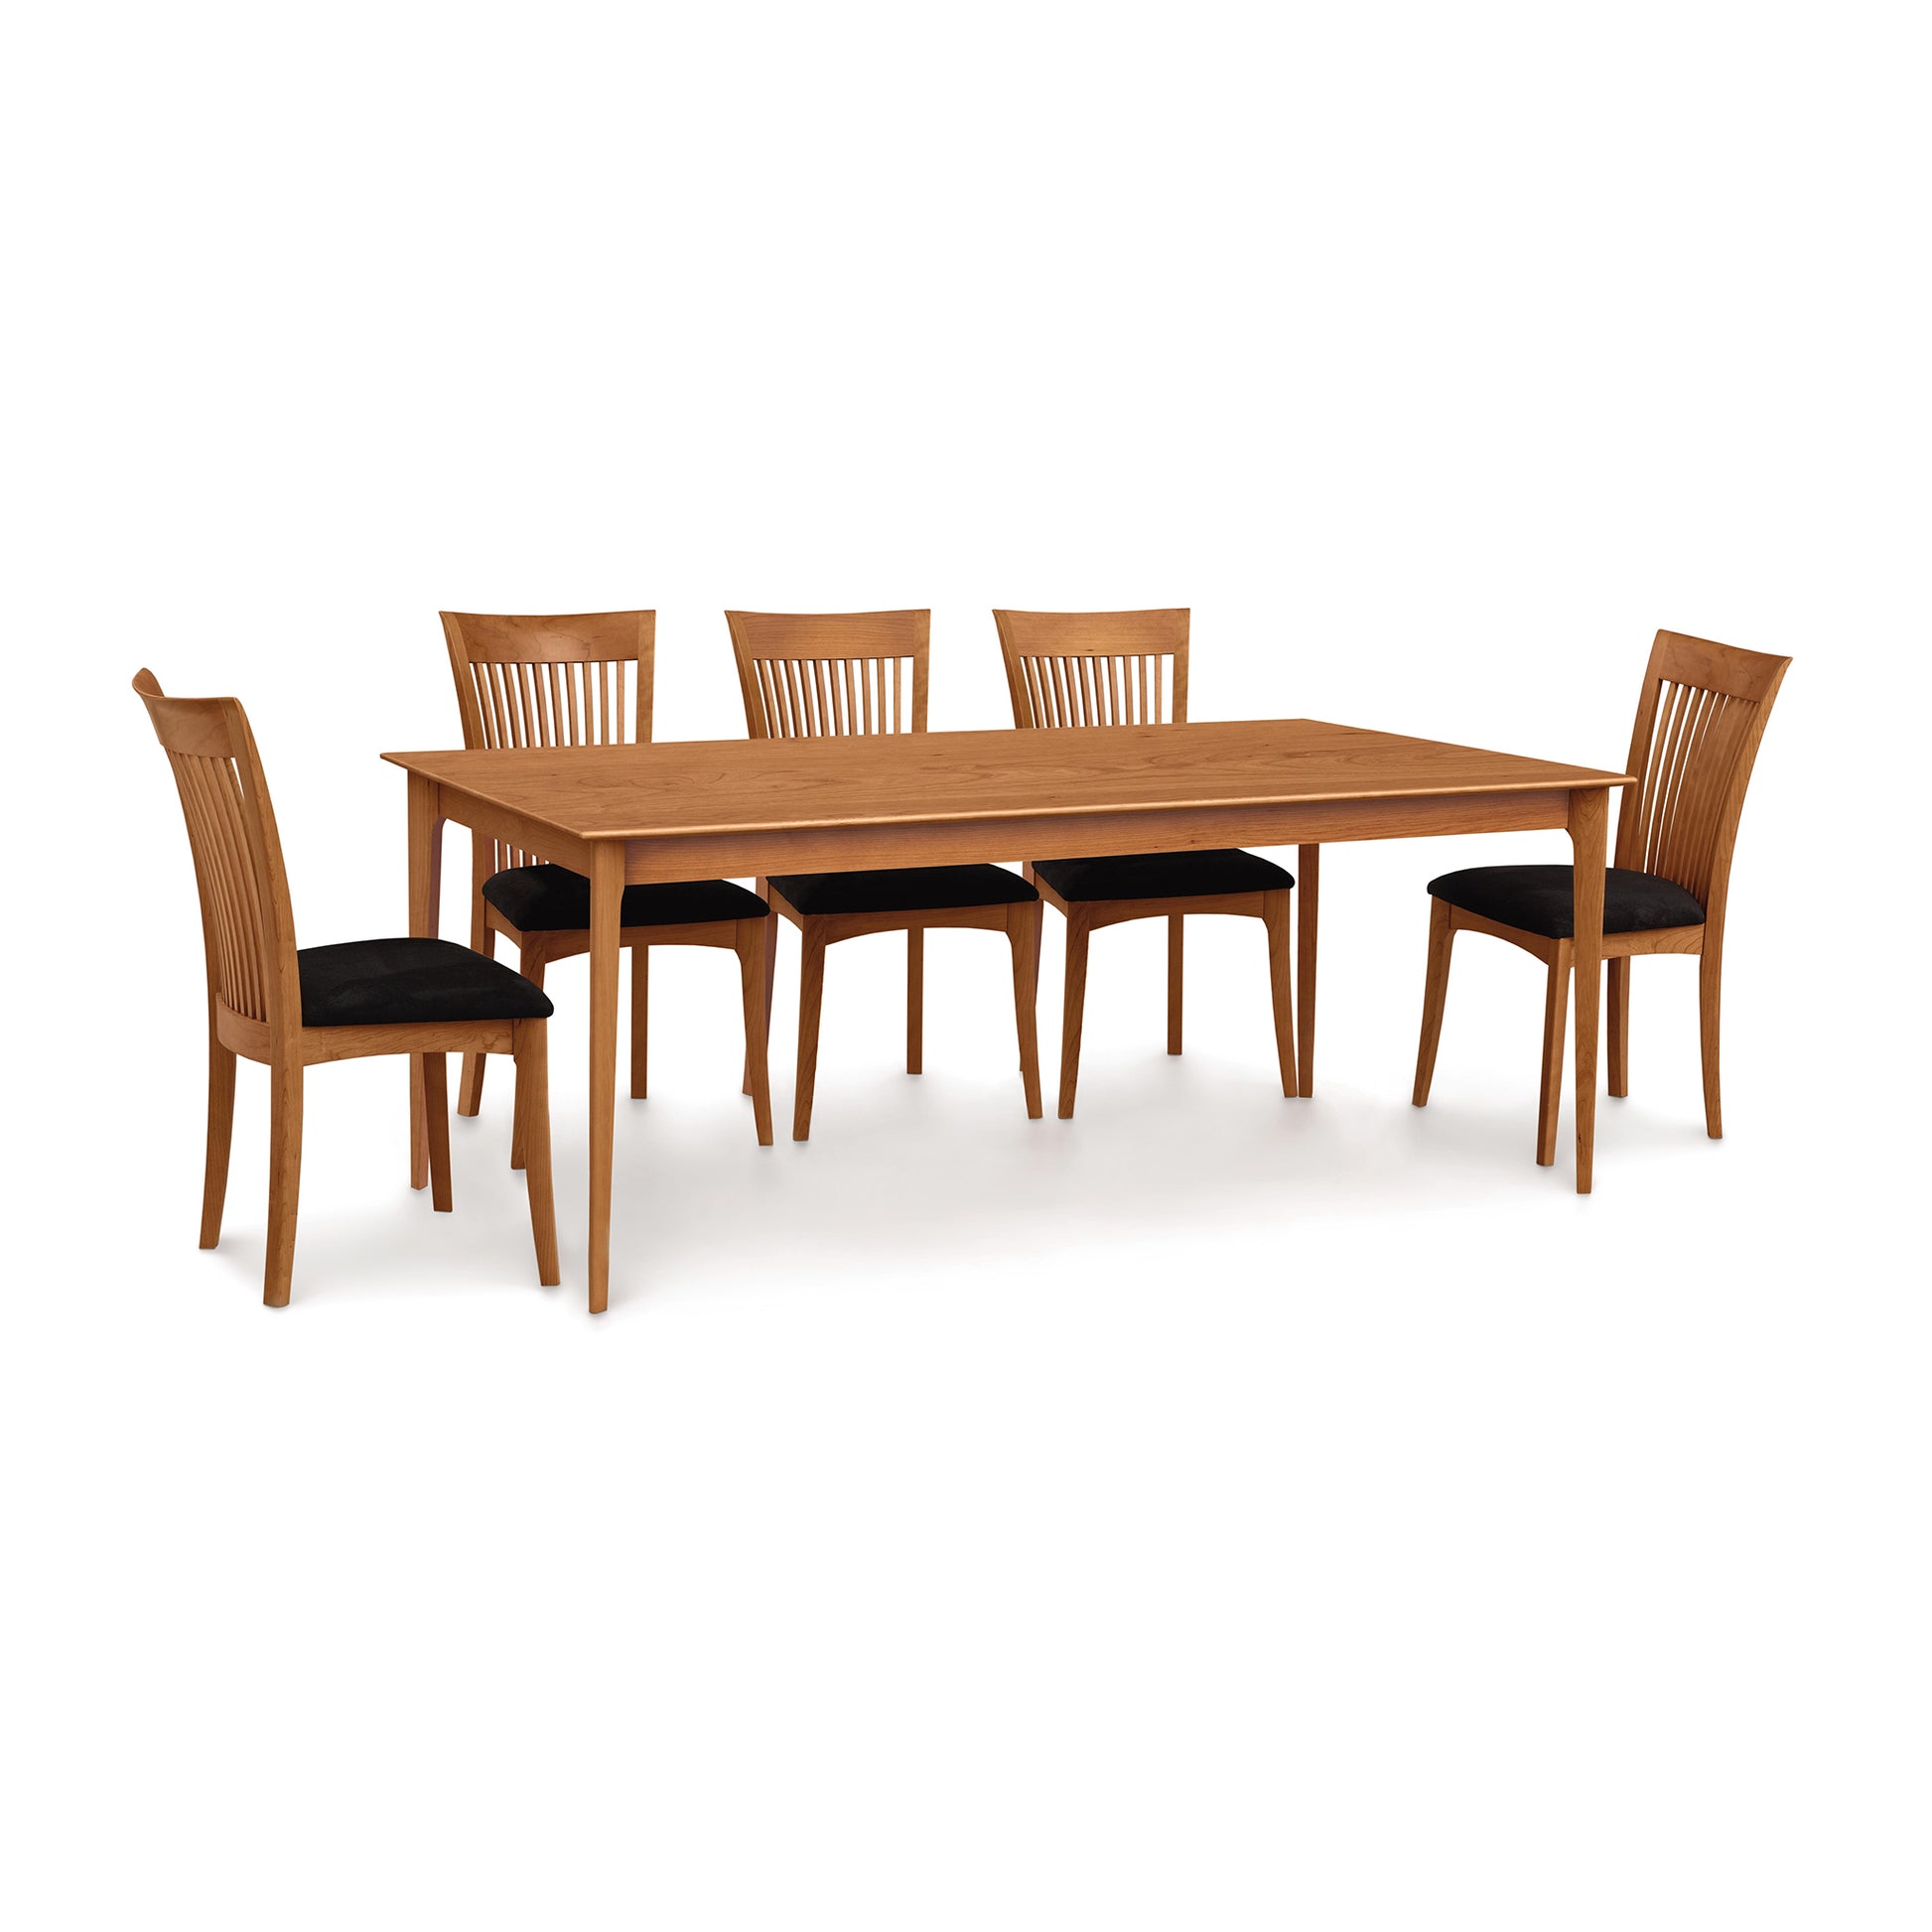 A solid cherry dining table with six matching chairs from the Copeland Furniture Sarah Shaker Tapered Leg Solid Top Table collection on a white background.